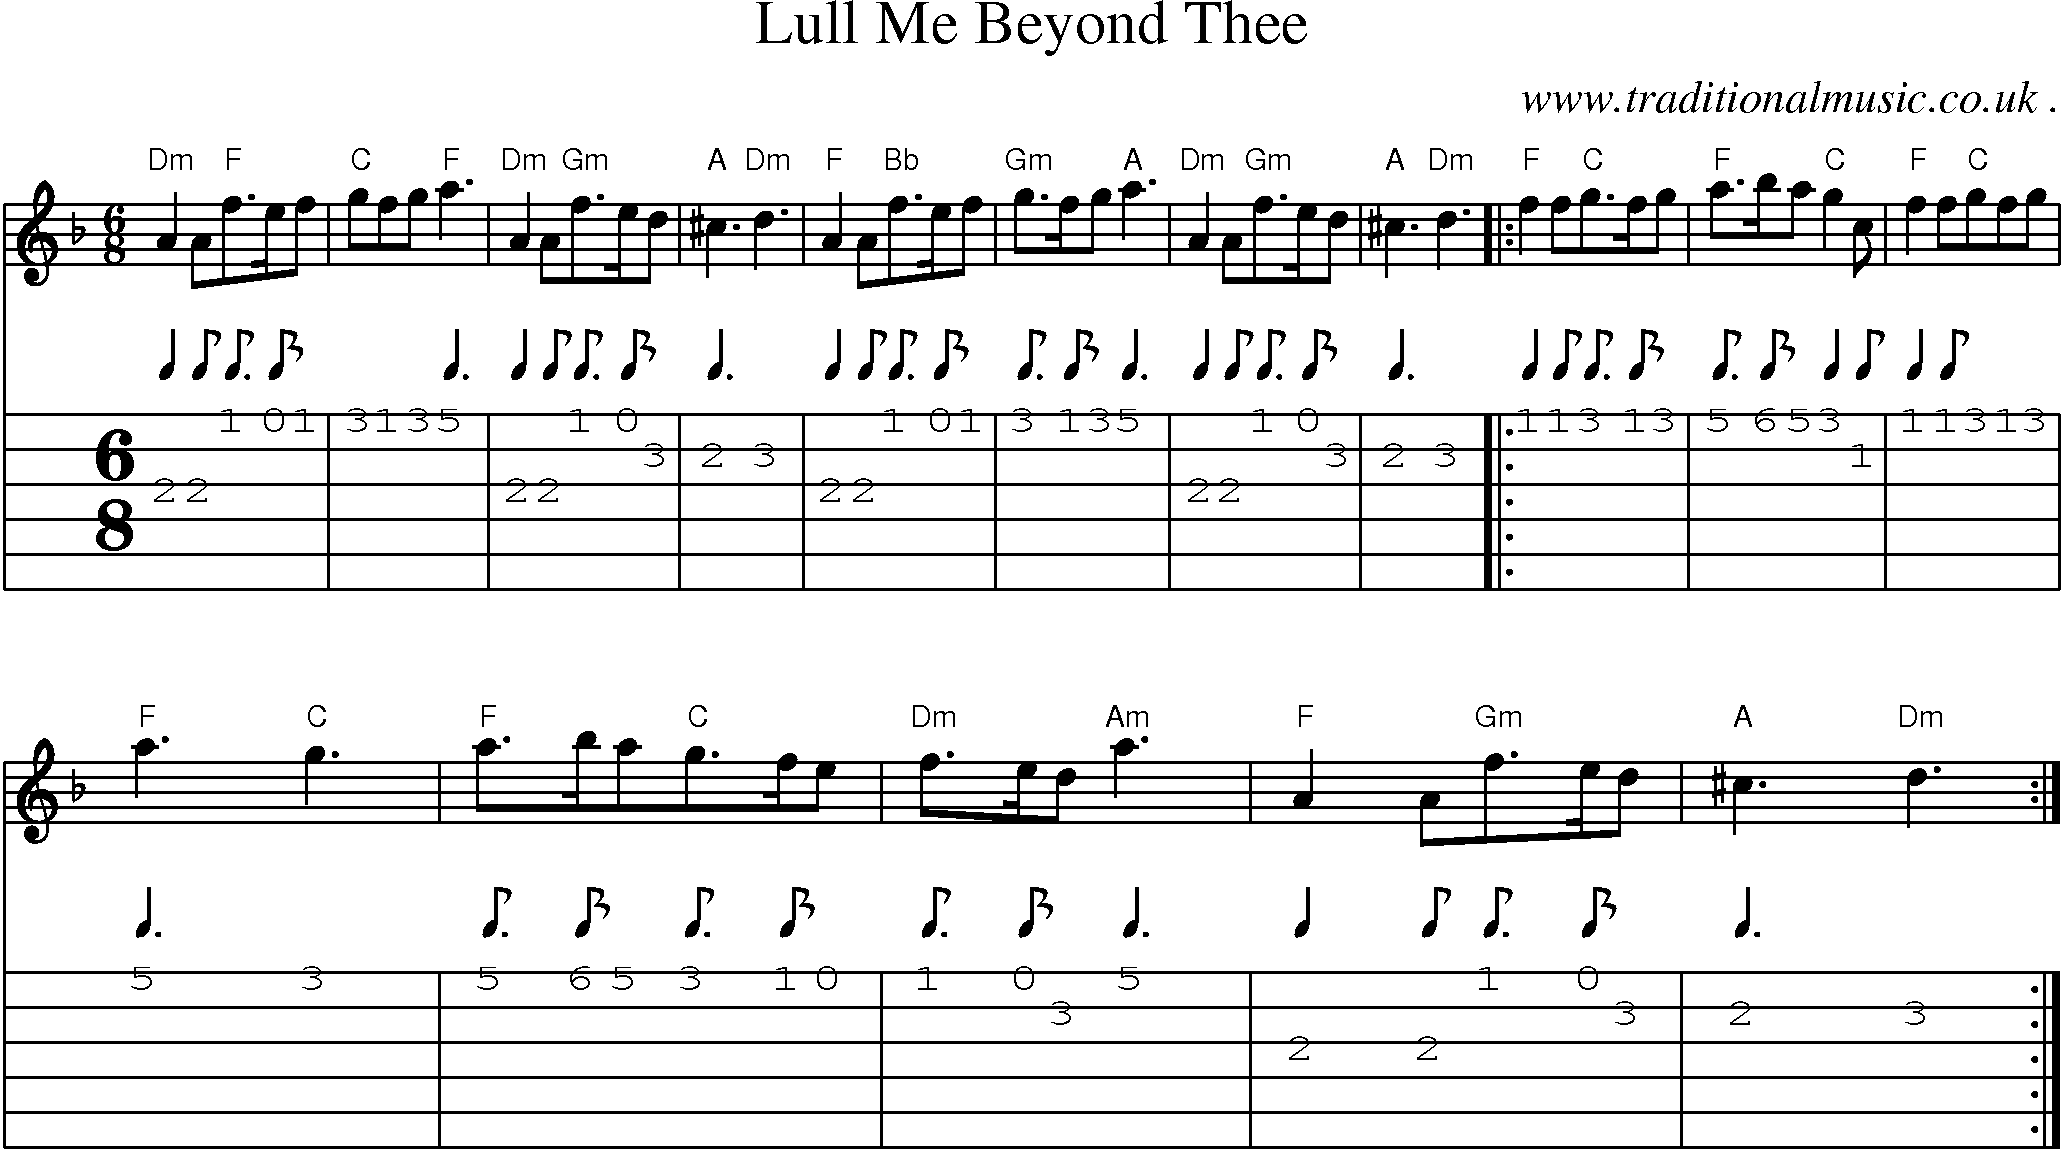 Sheet-Music and Guitar Tabs for Lull Me Beyond Thee